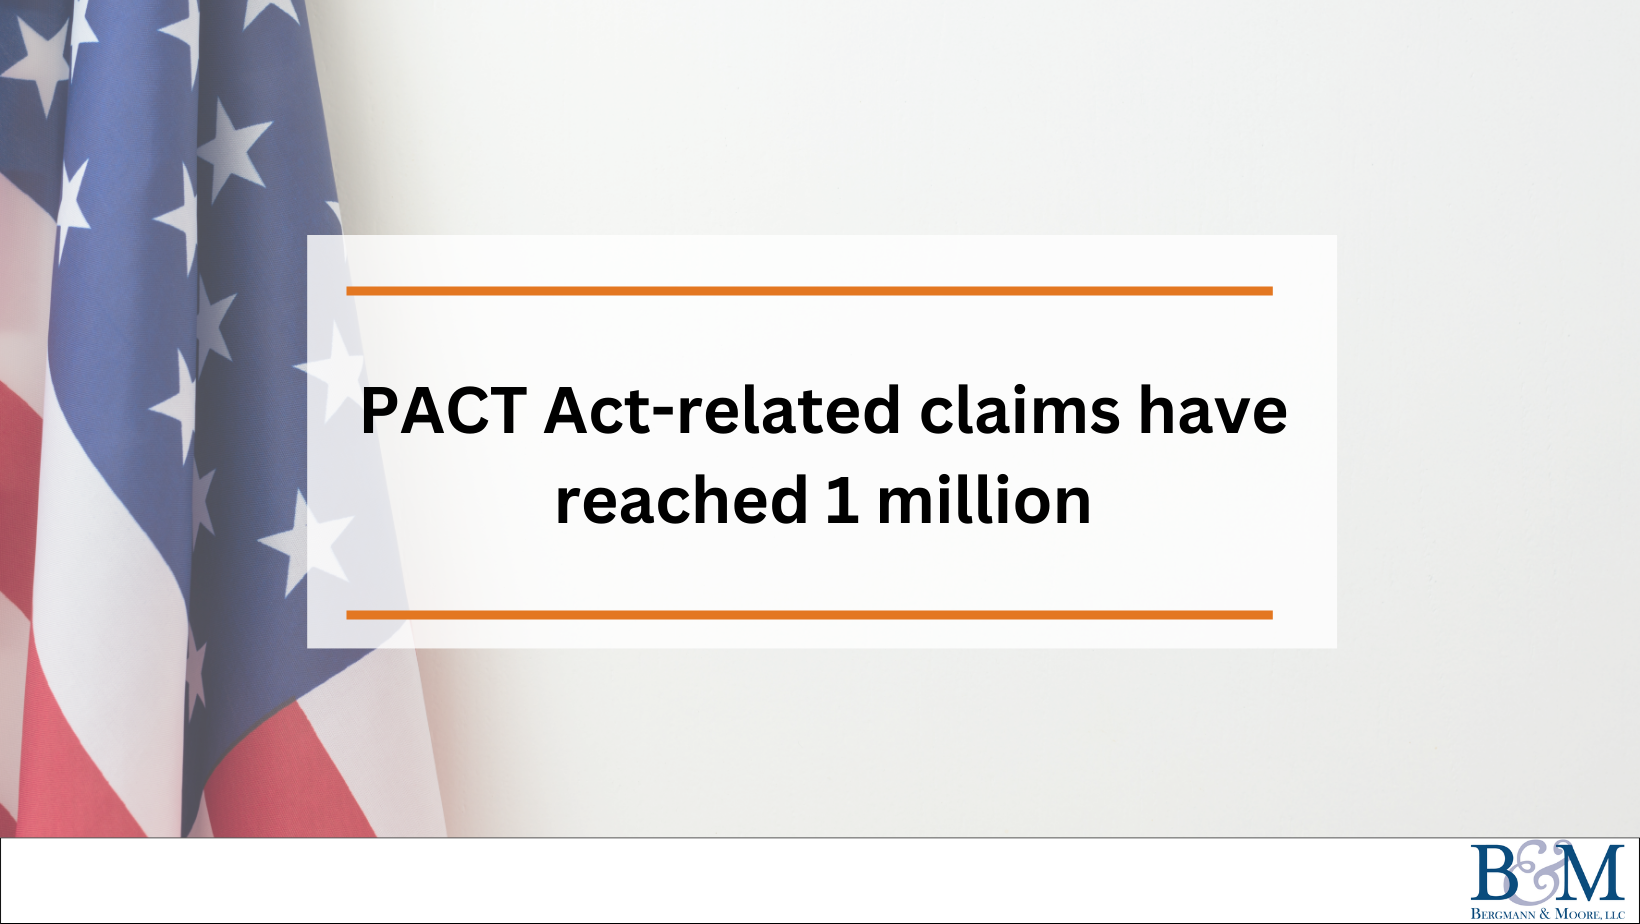 PACT Act-related claims have reached 1 million